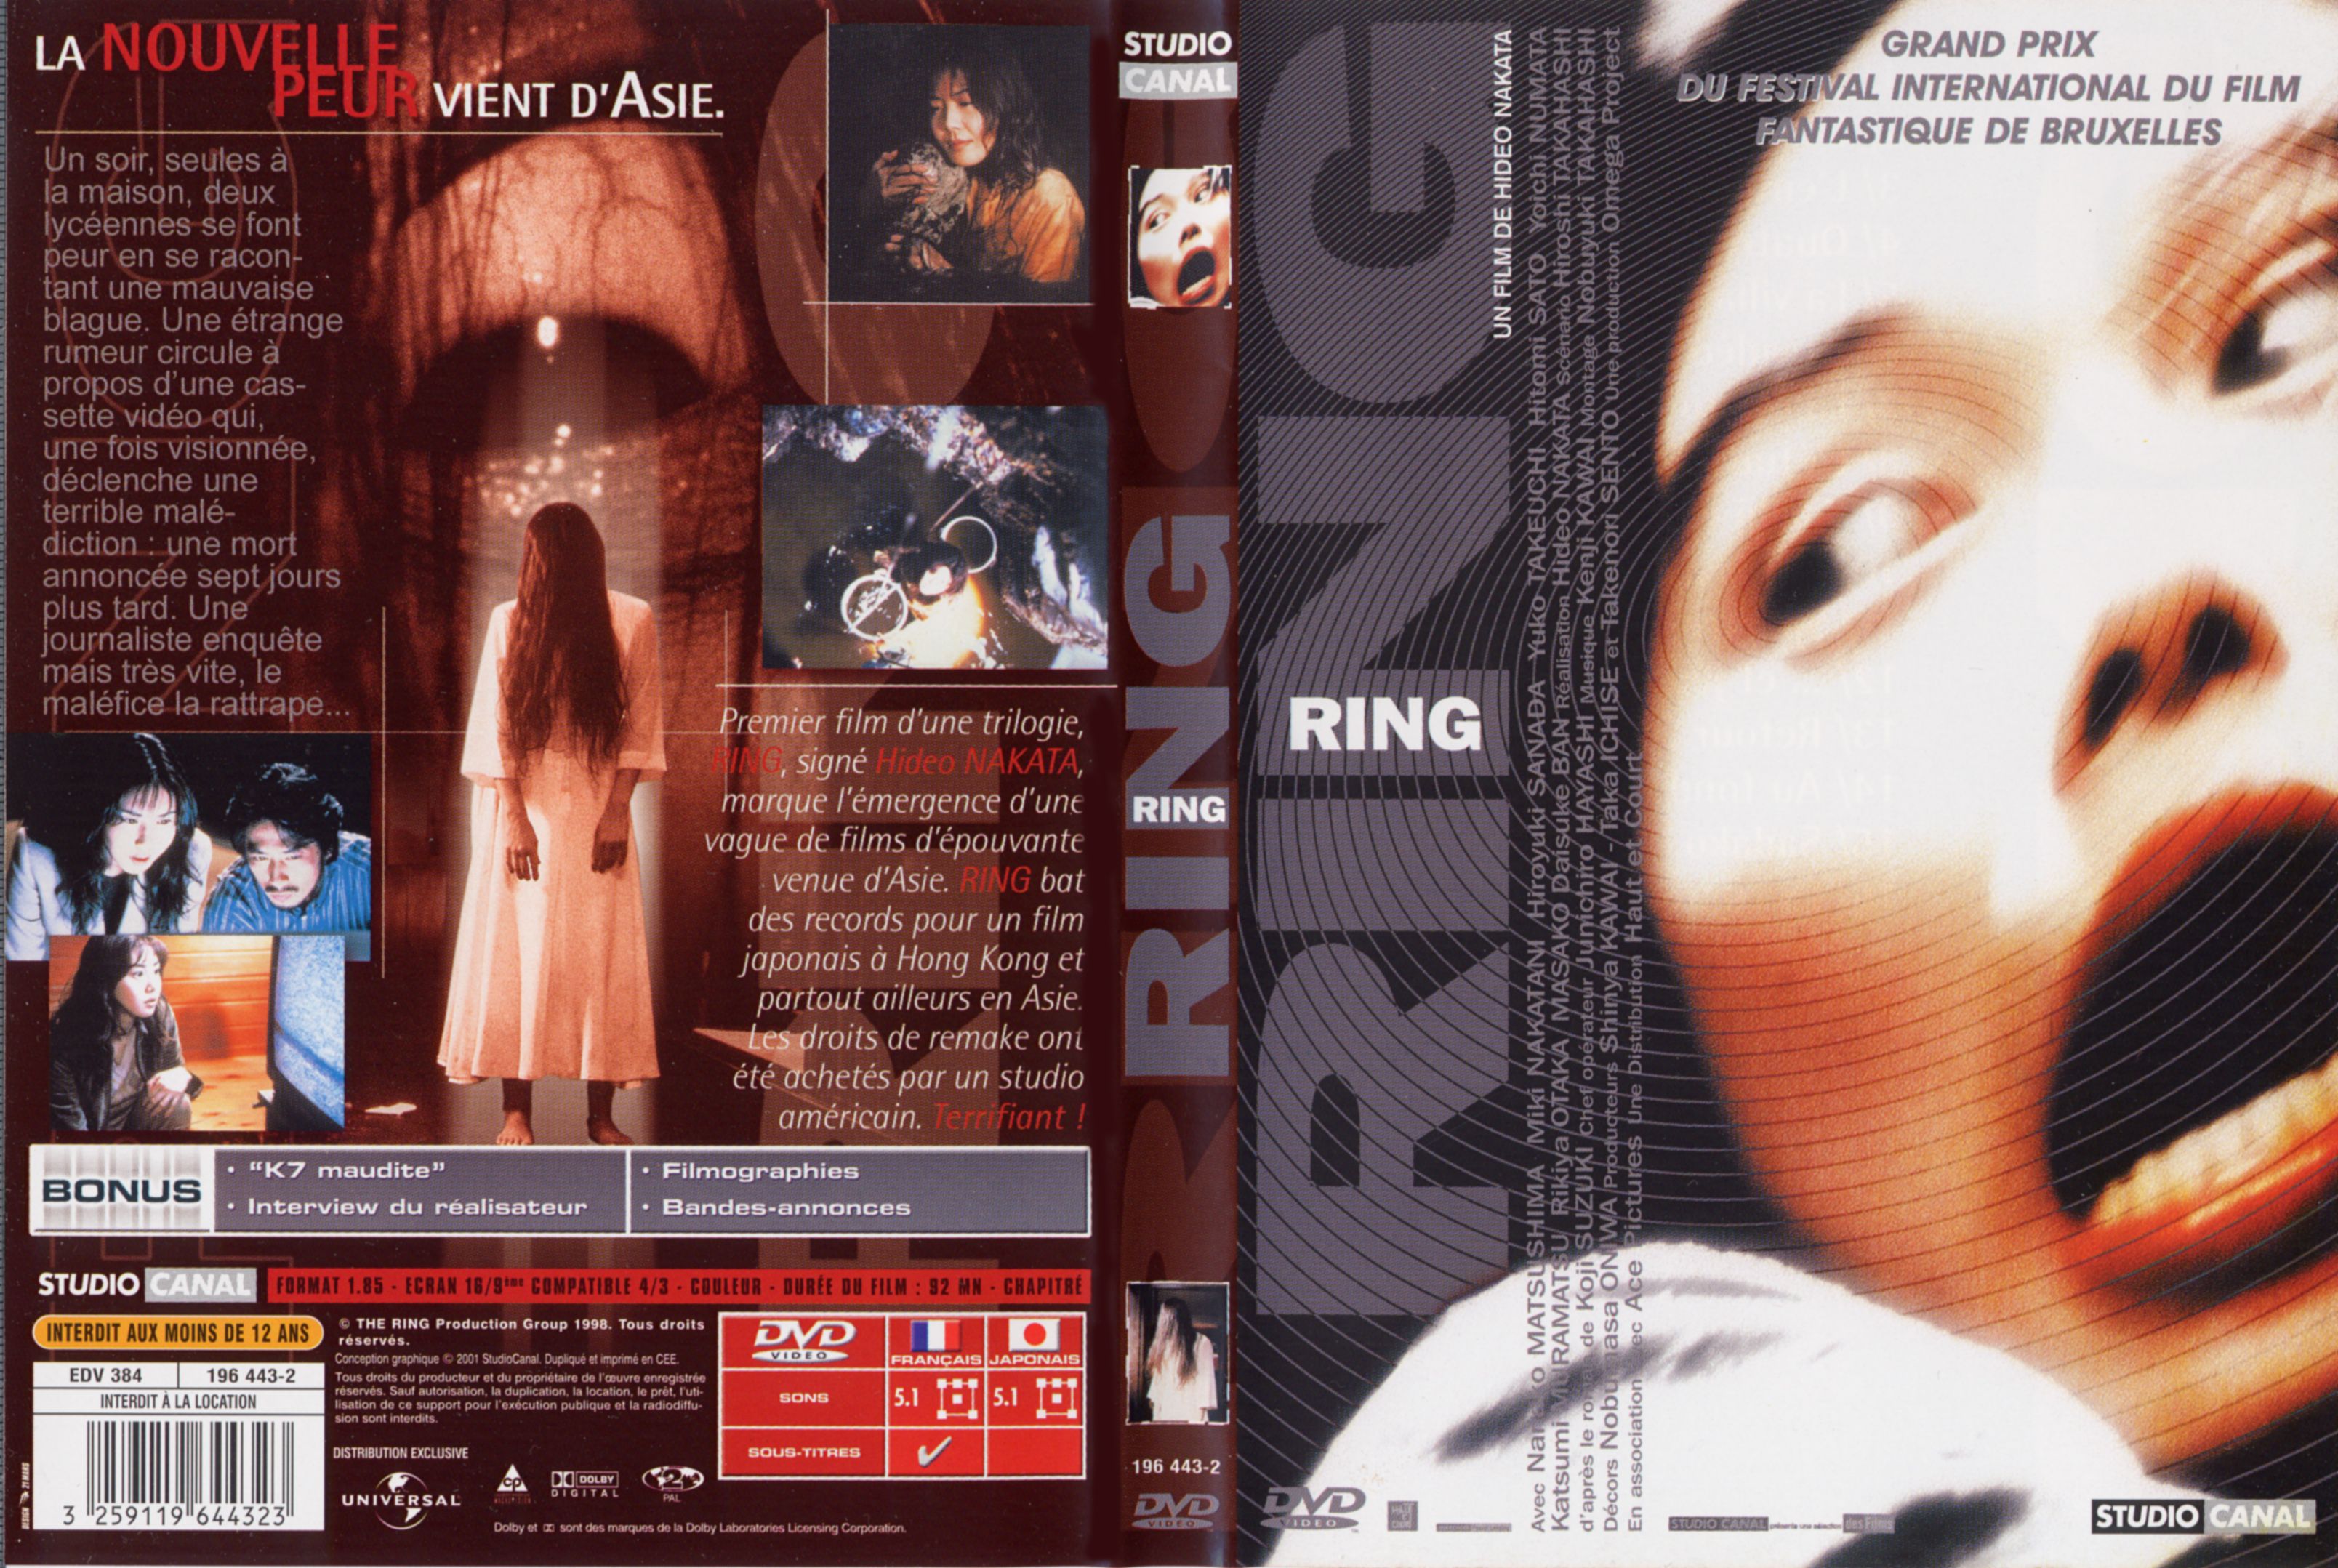 Jaquette DVD Ring